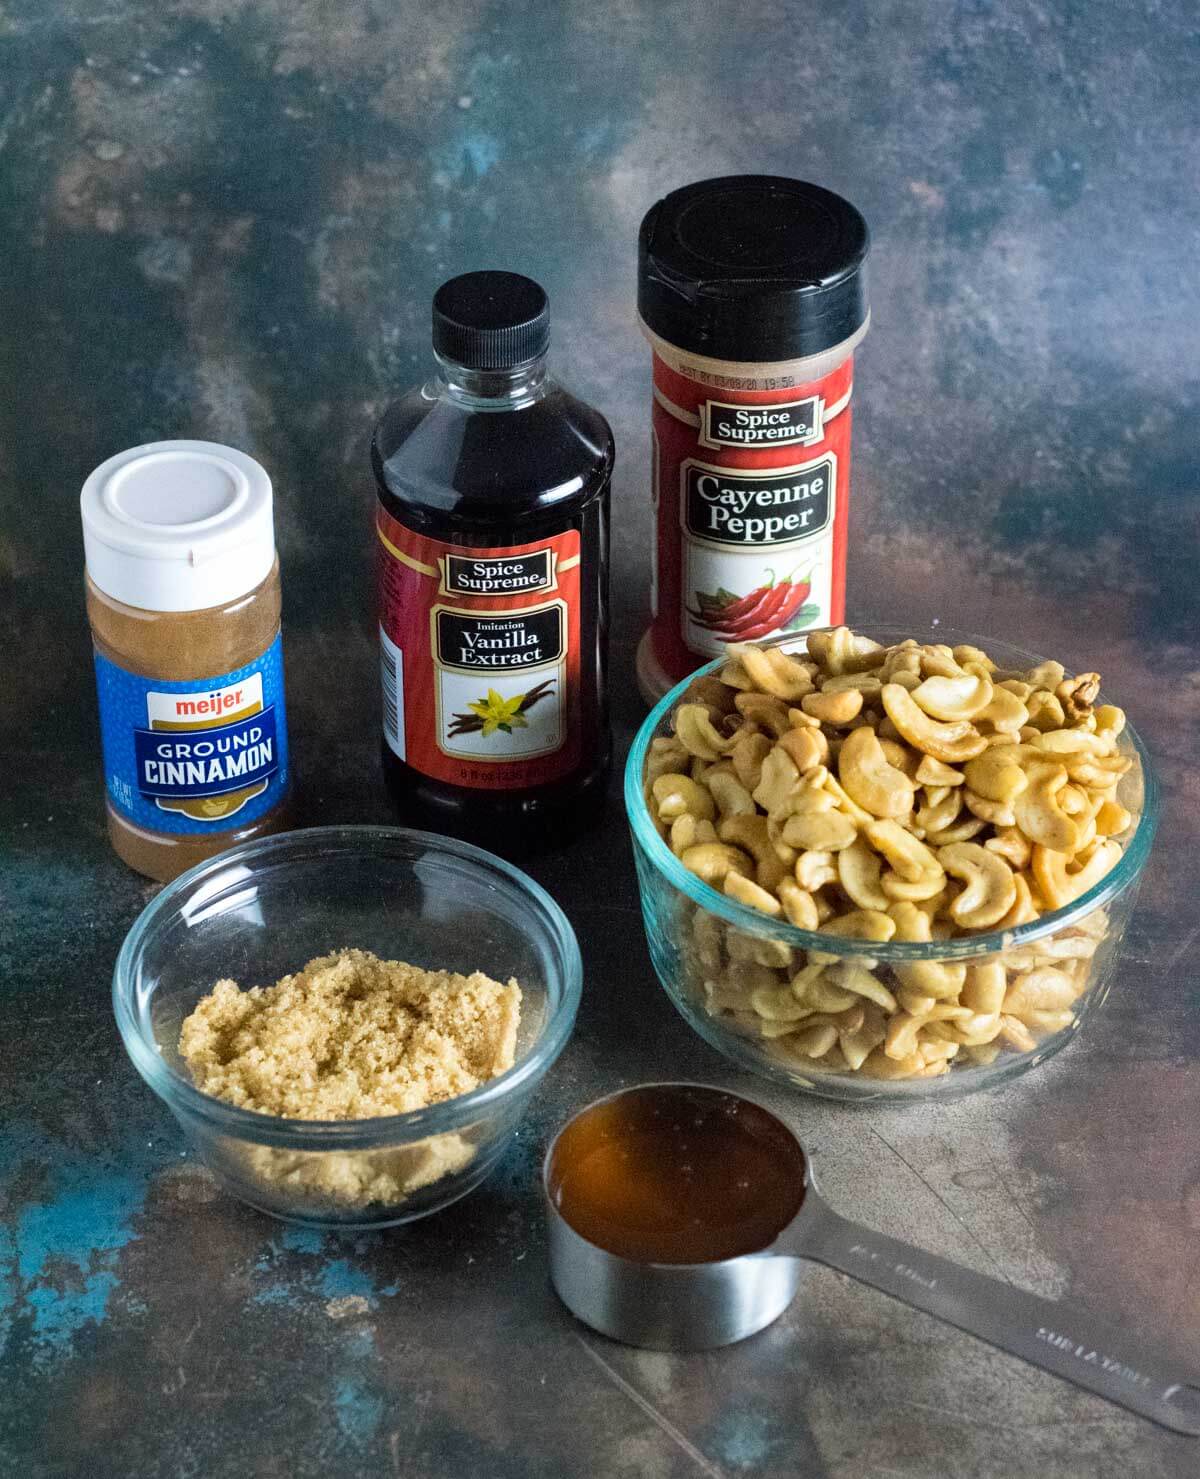 Showing ingredients for honey roasted cashews.